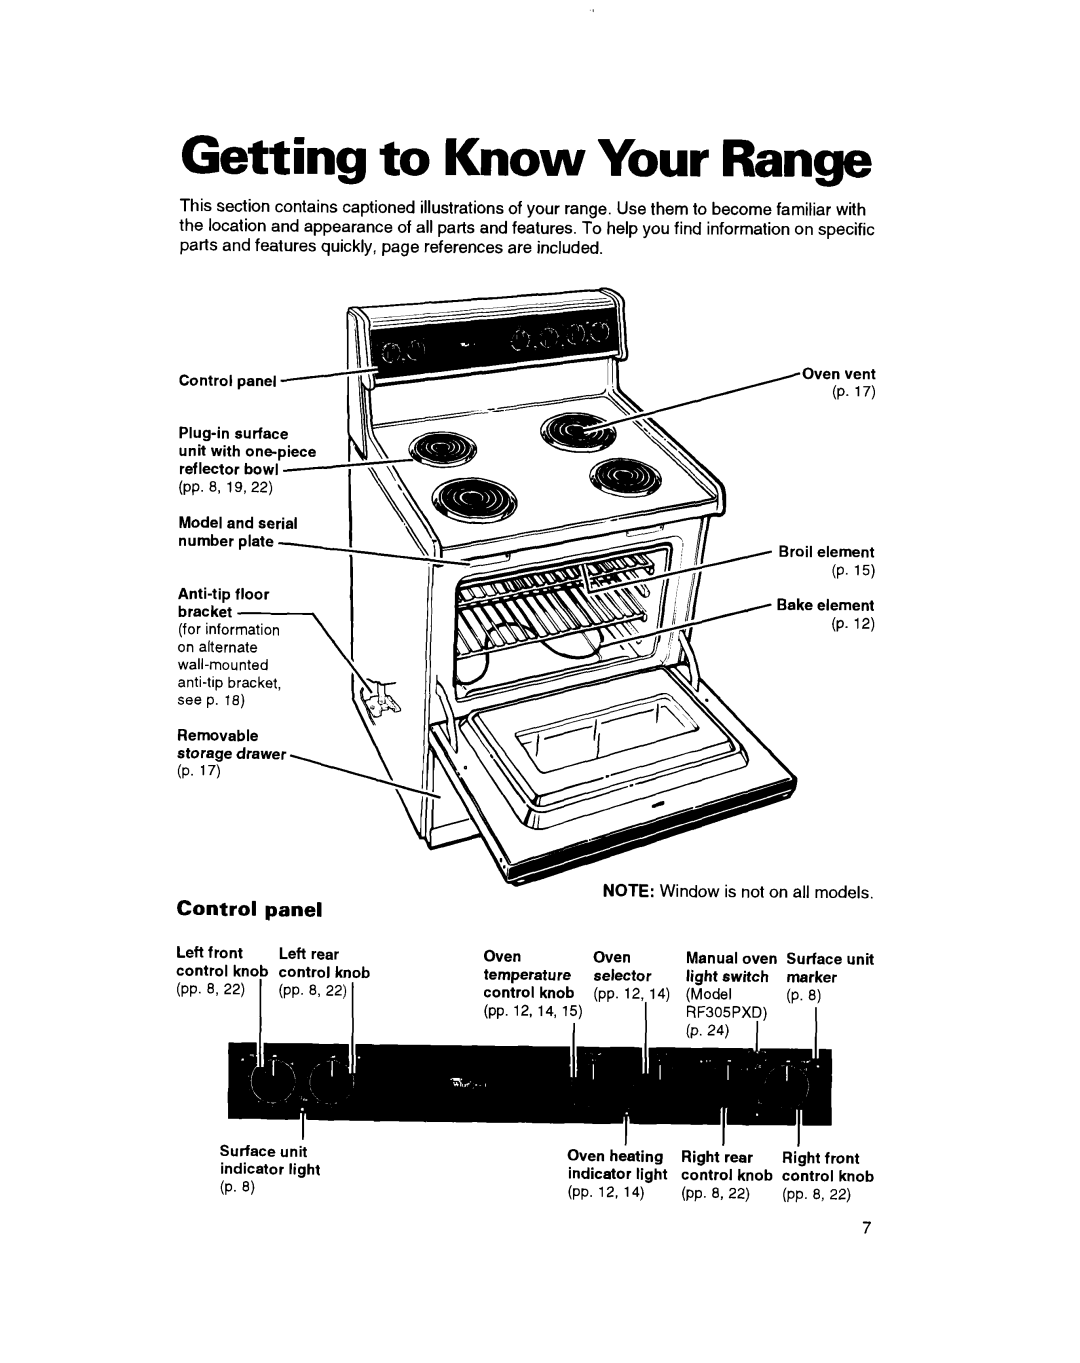 Whirlpool RF305PXD, RF302BXD, RF3020XD manual Getting to Know Your Range, Control, panel 